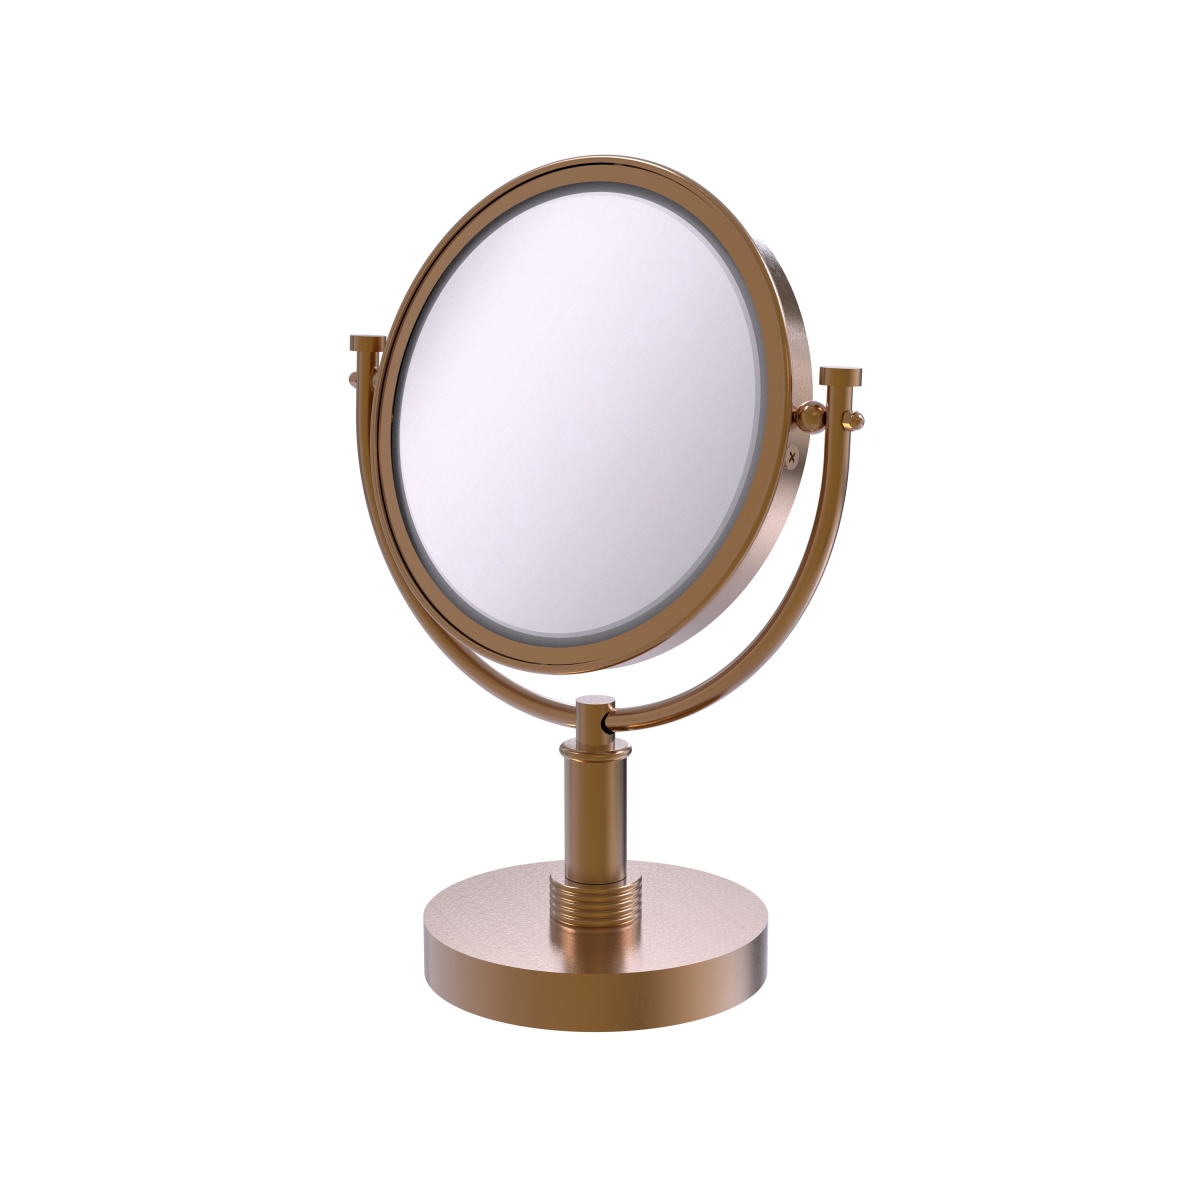 Dm-4g-3x-bbr Grooved Ring Style 8 In. Vanity Top Make-up Mirror 3x Magnification, Brushed Bronze